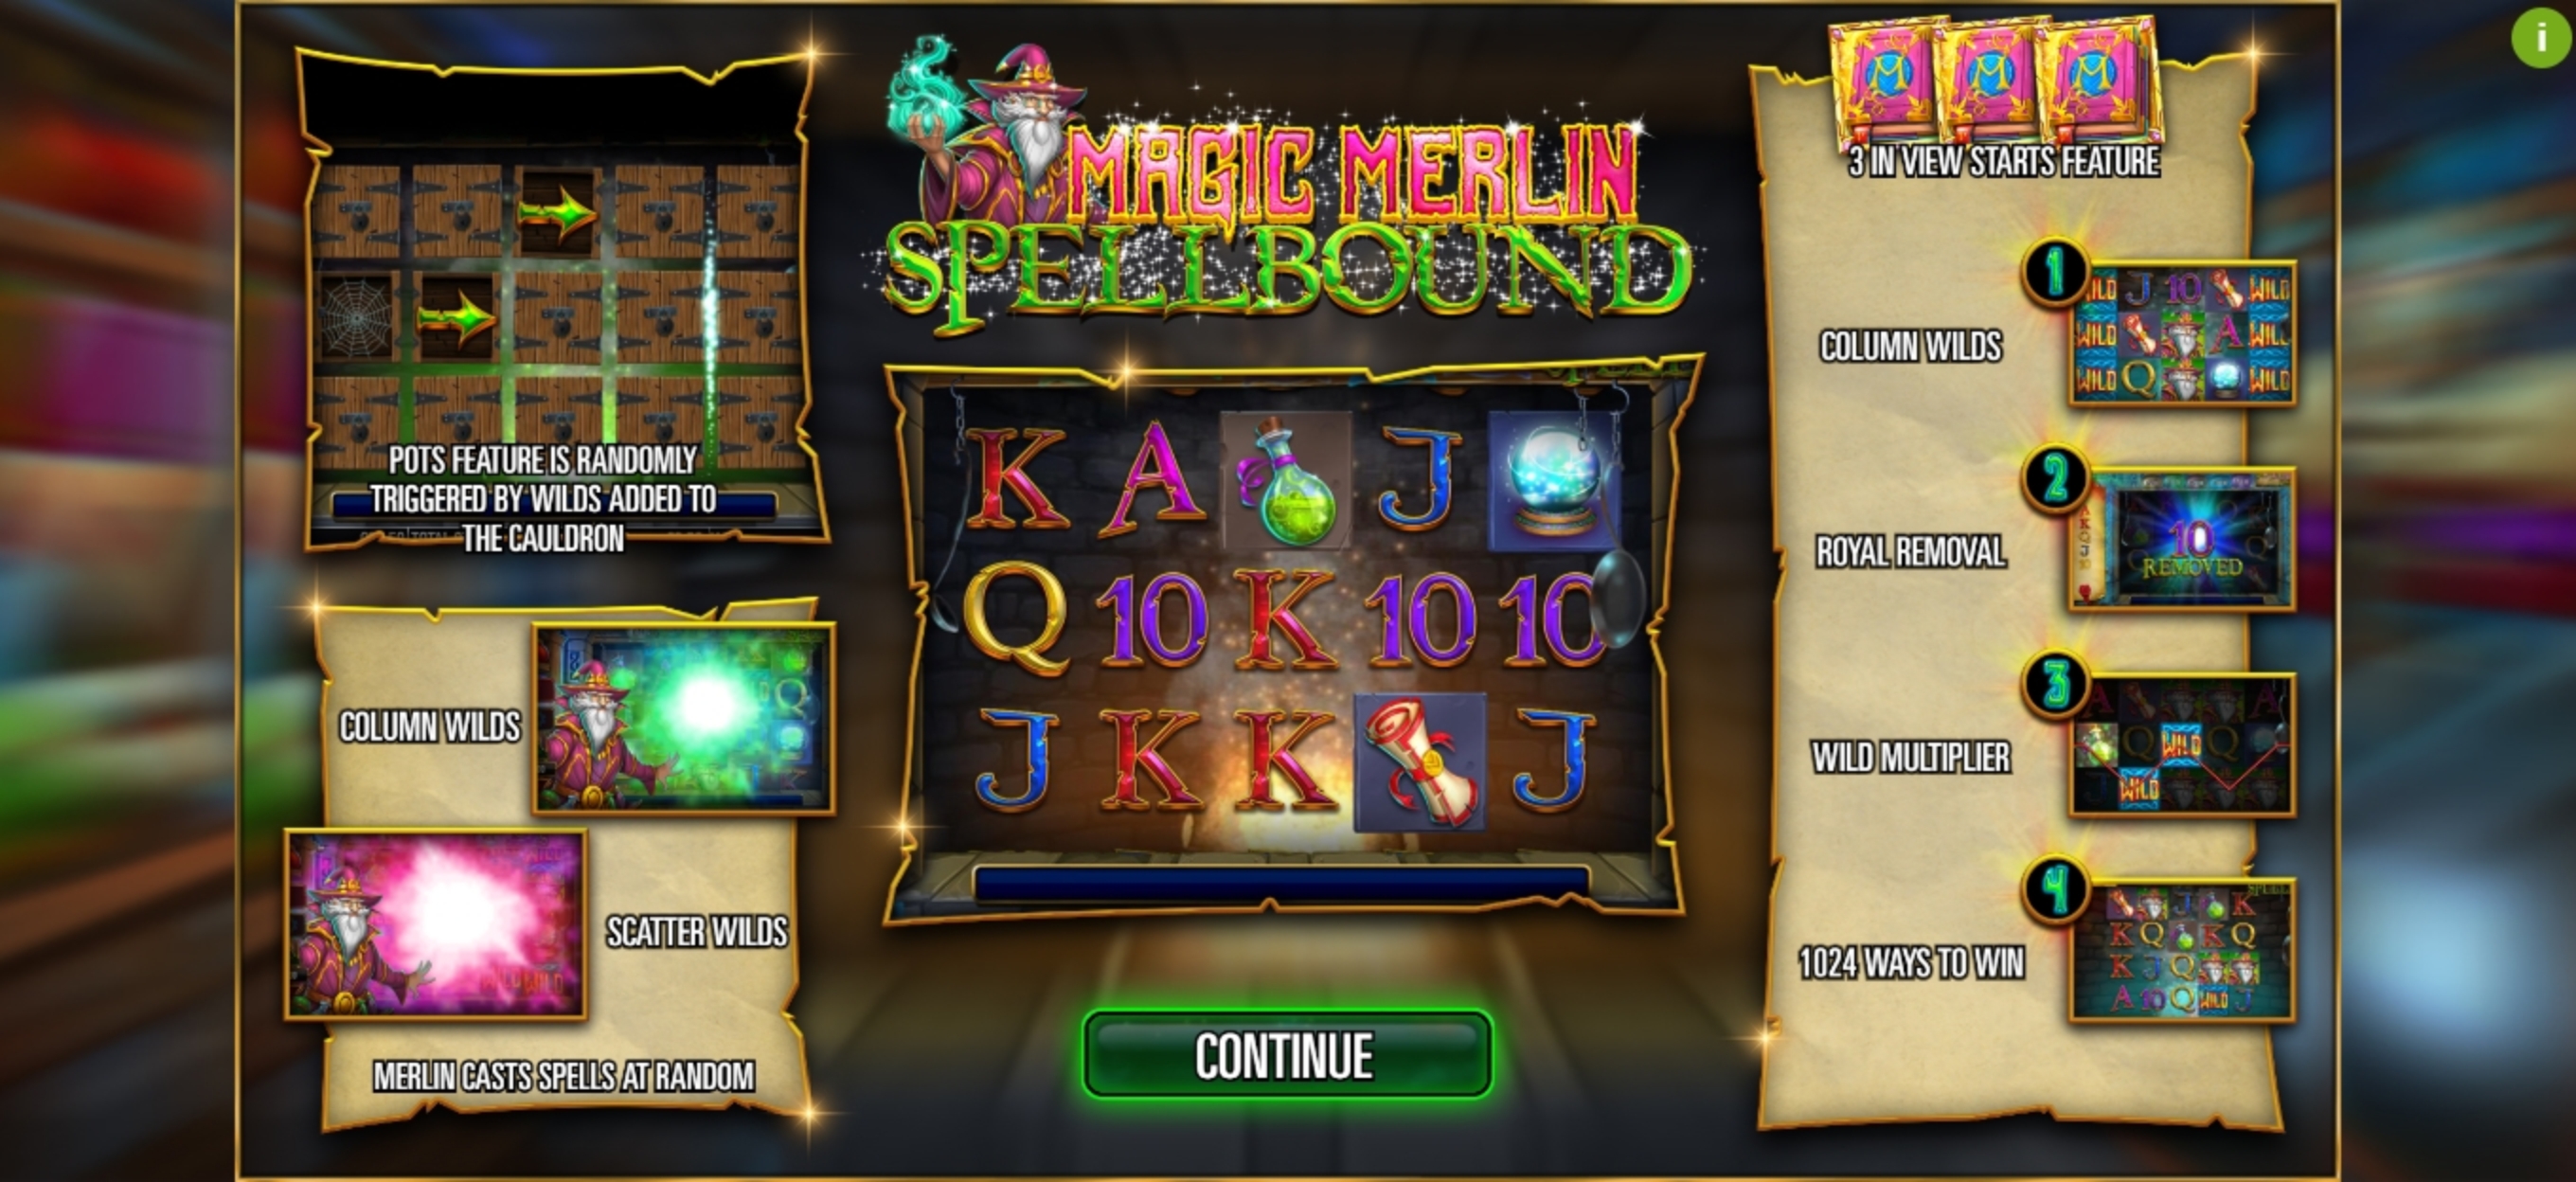 Play Magic Merlin: Spellbound Free Casino Slot Game by Storm Gaming Technology